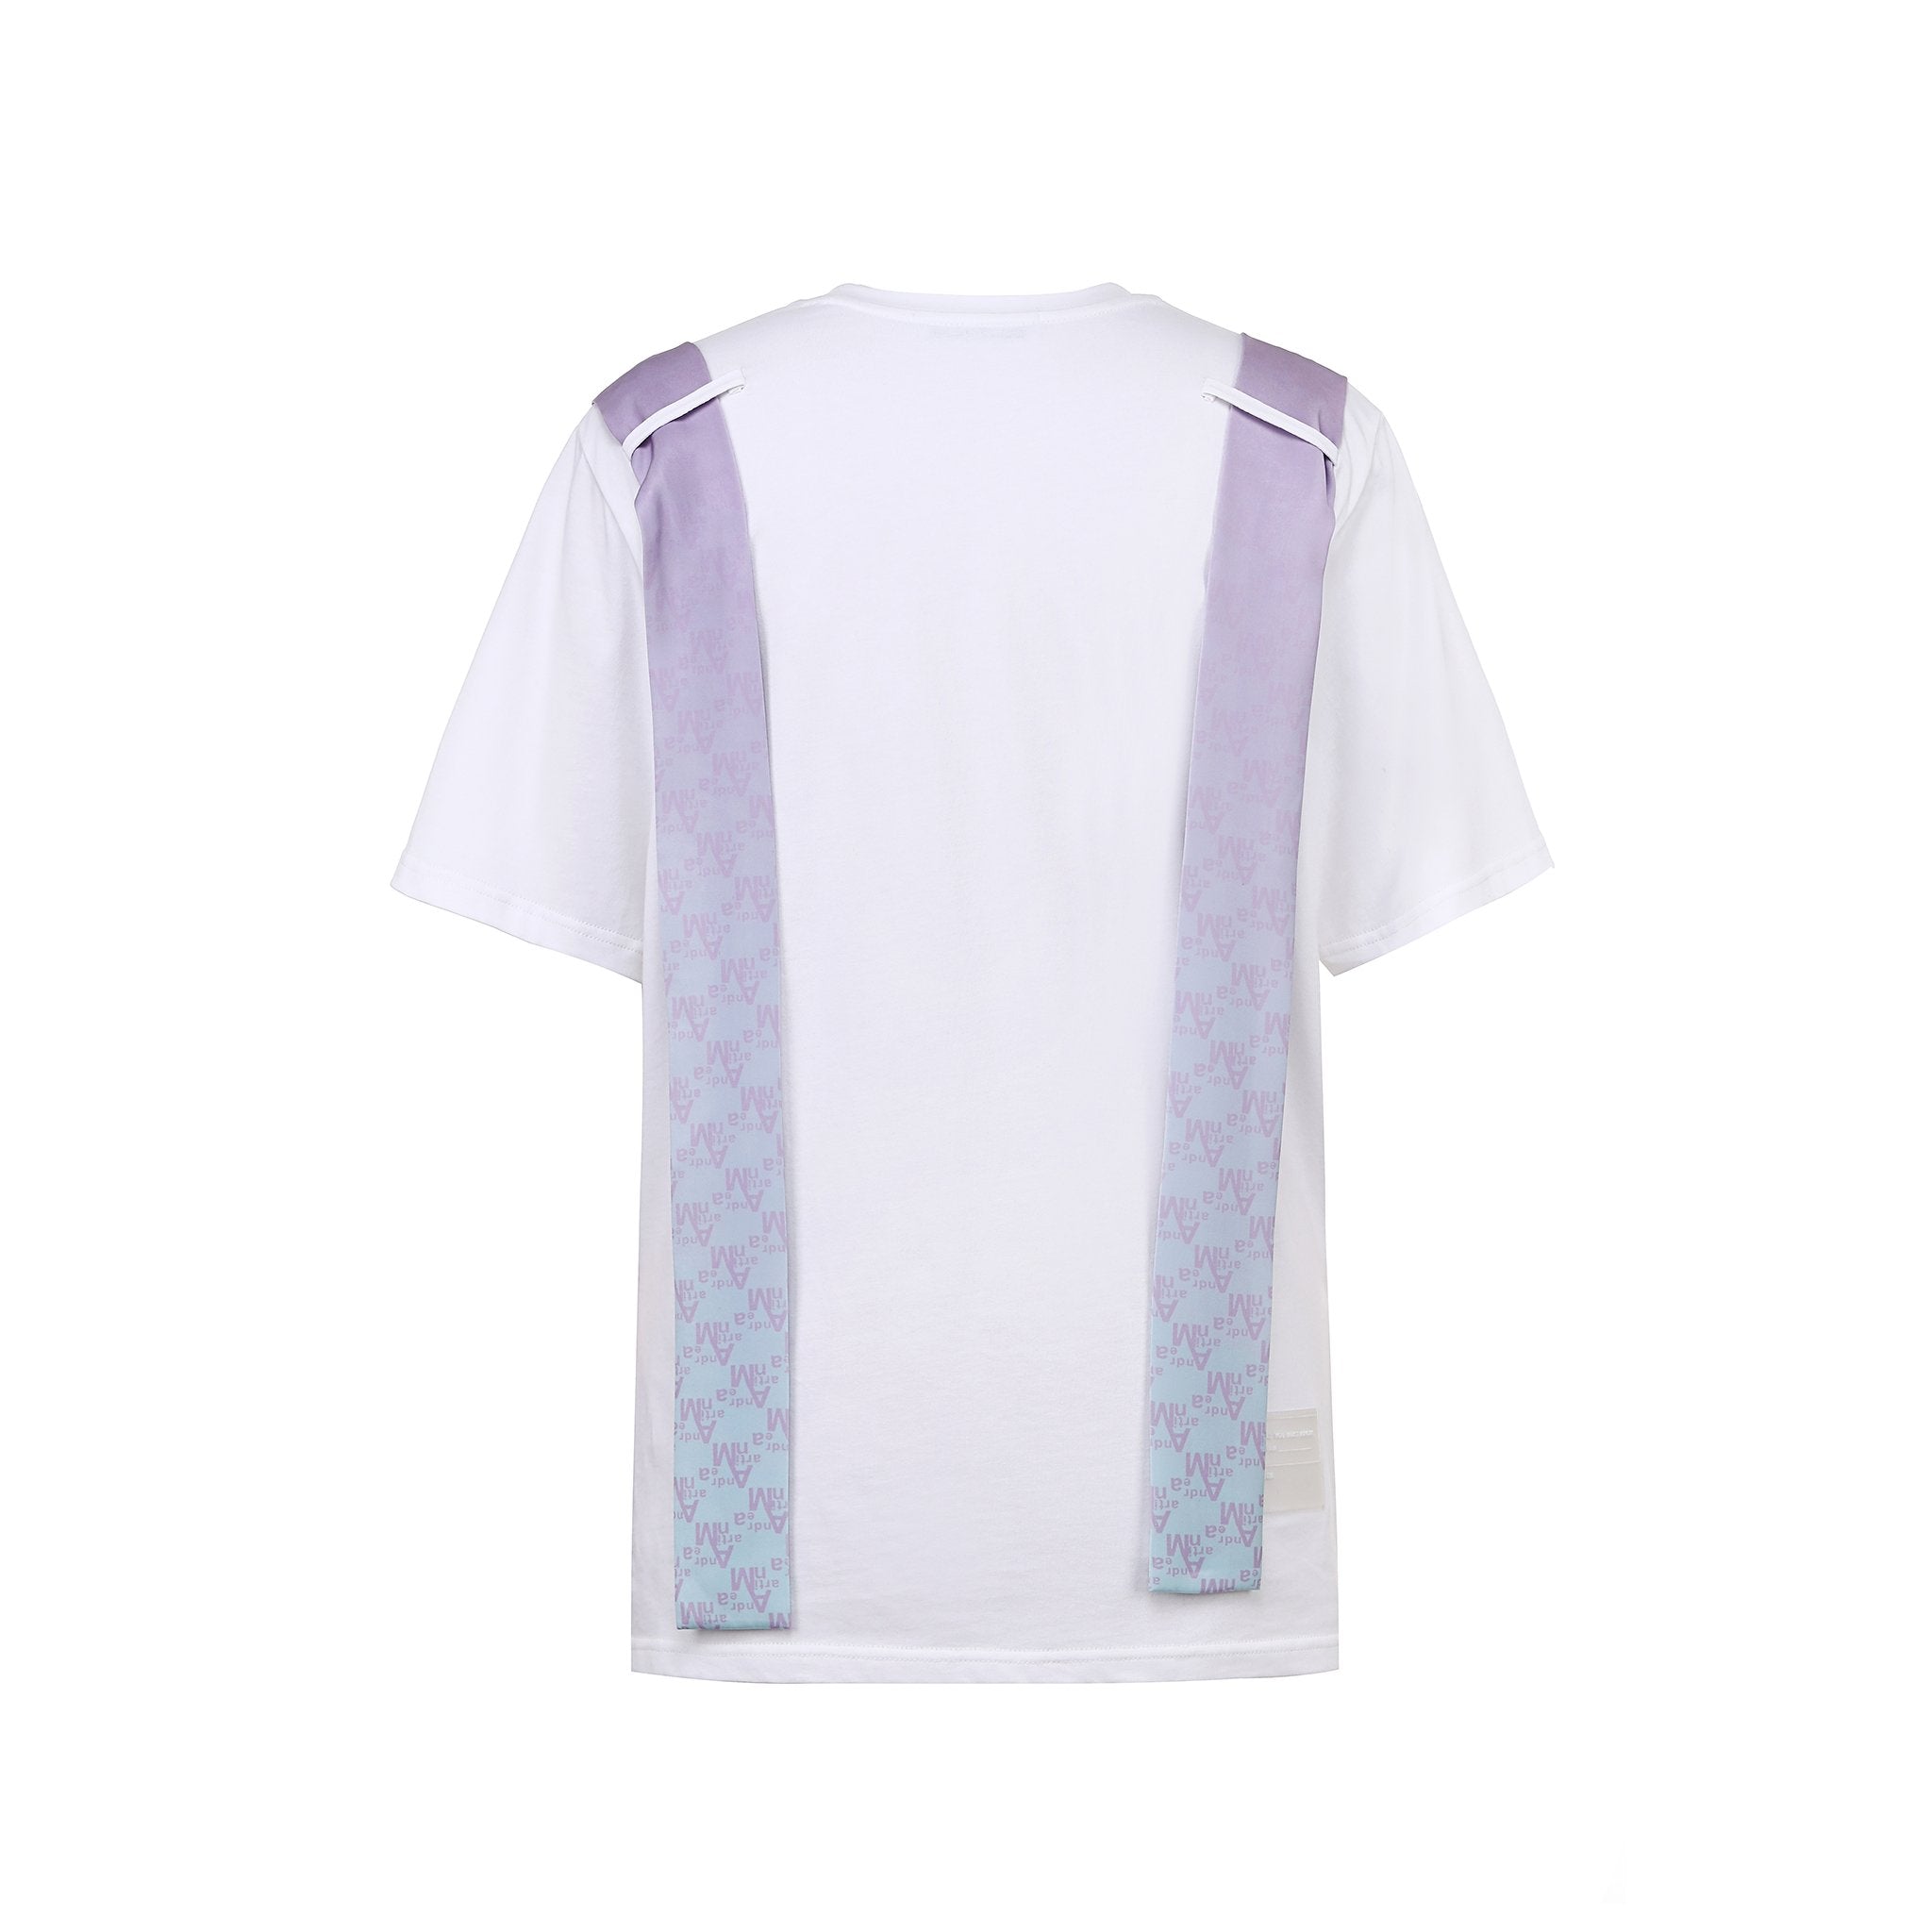 Andrea Martin Butterfly Cross Straps T-Shirt | MADA IN CHINA